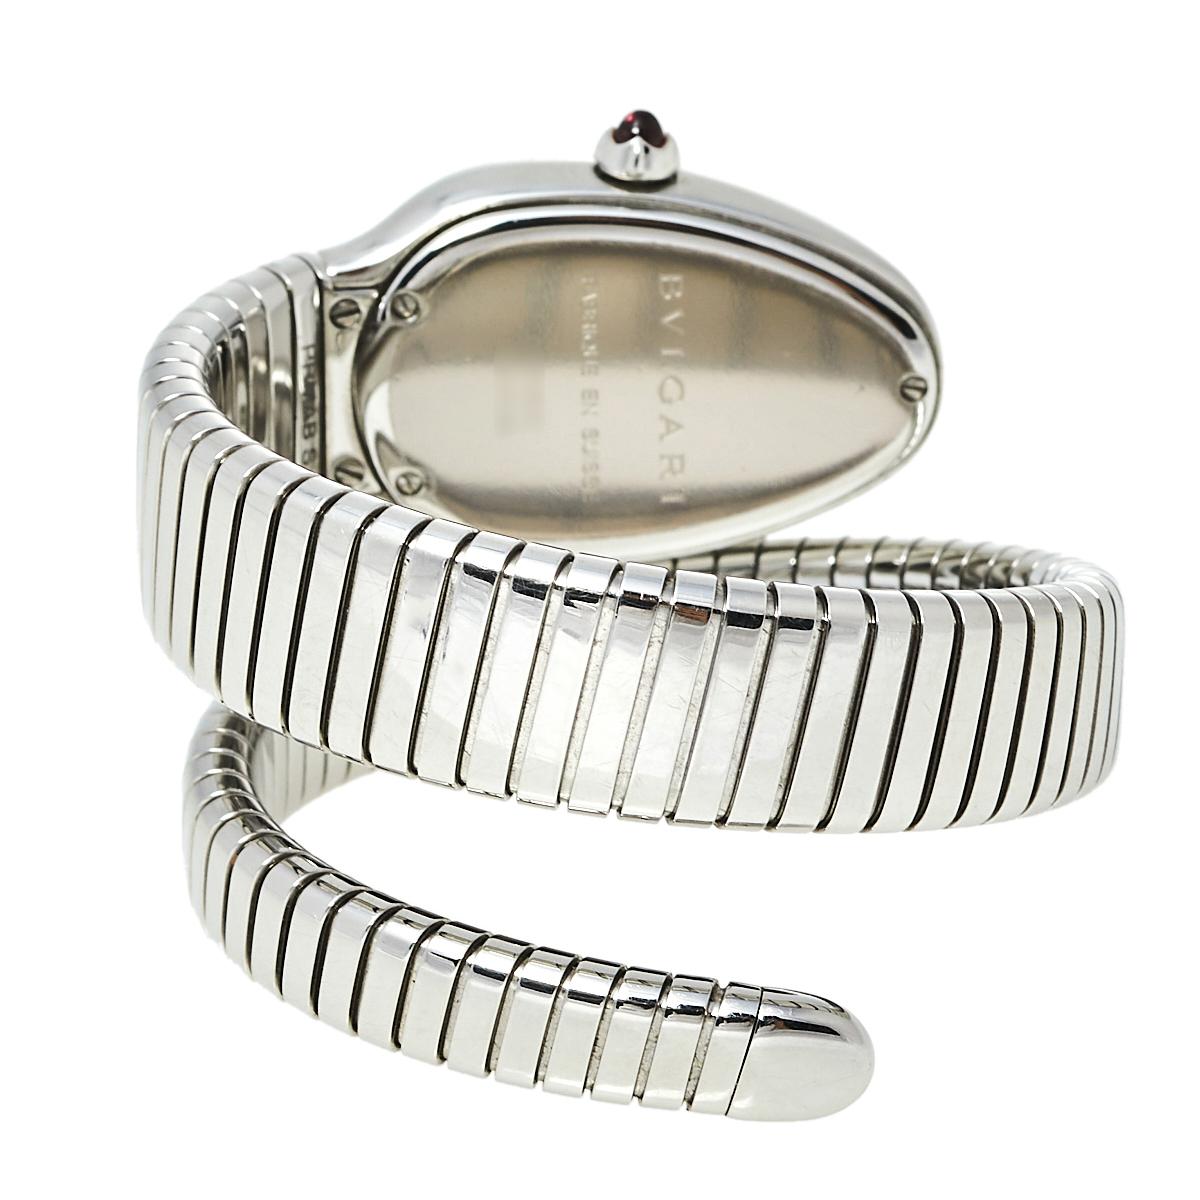 Exuding glamour and unique style, the Serpenti Tubogas quartz watch is an icon of the Bvlgari House. The spiraled stainless steel body has its ends designed as the head and tail of a serpent. Wearable and chic, the flexible design has a guilloché